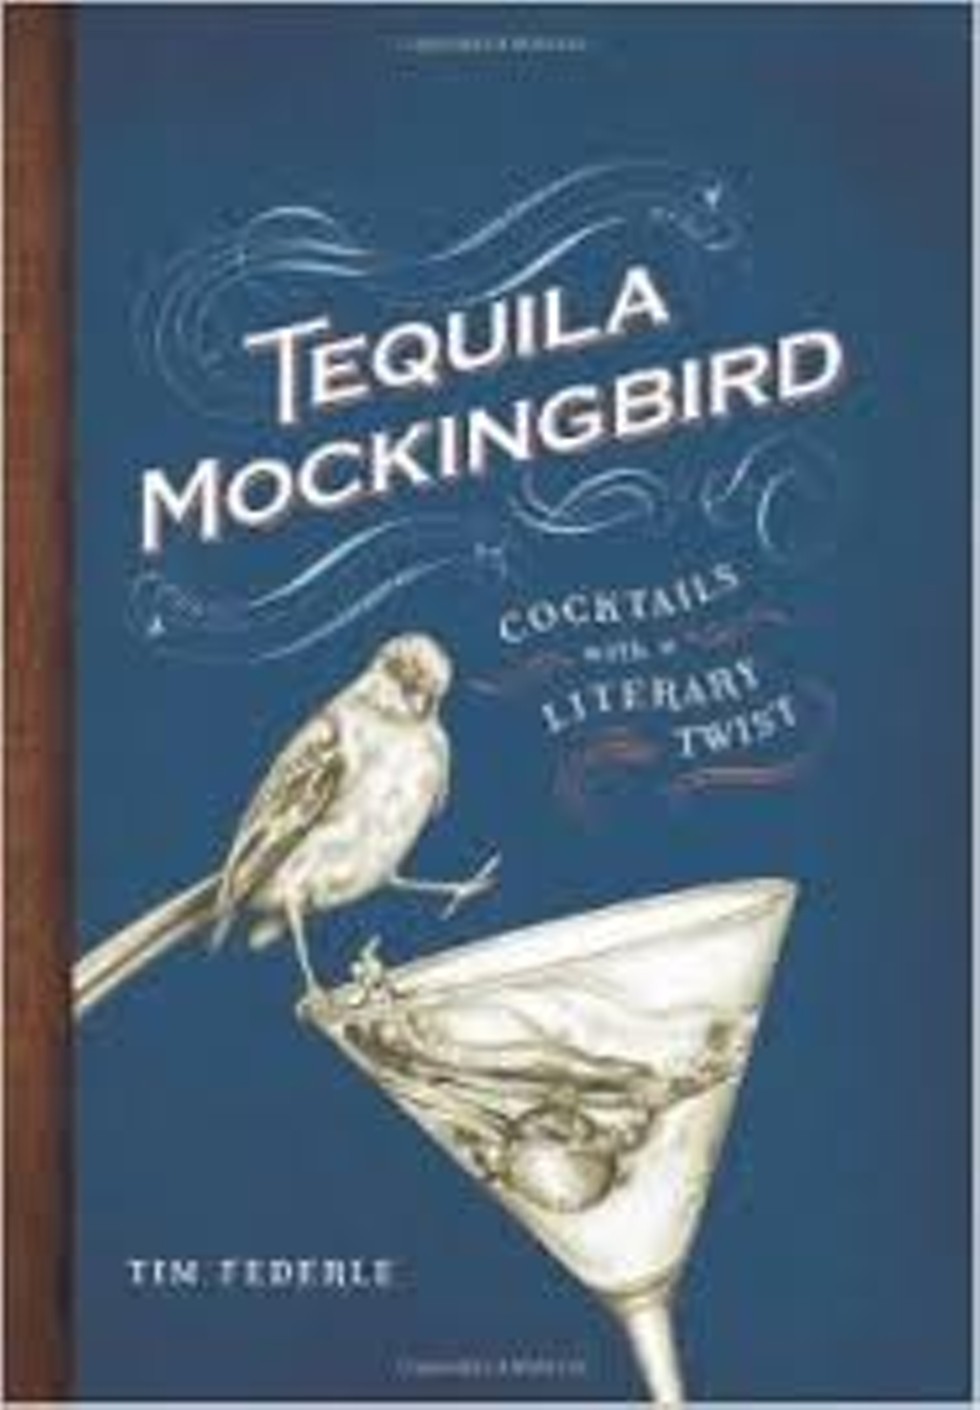 Cocktails with a Literary Twist